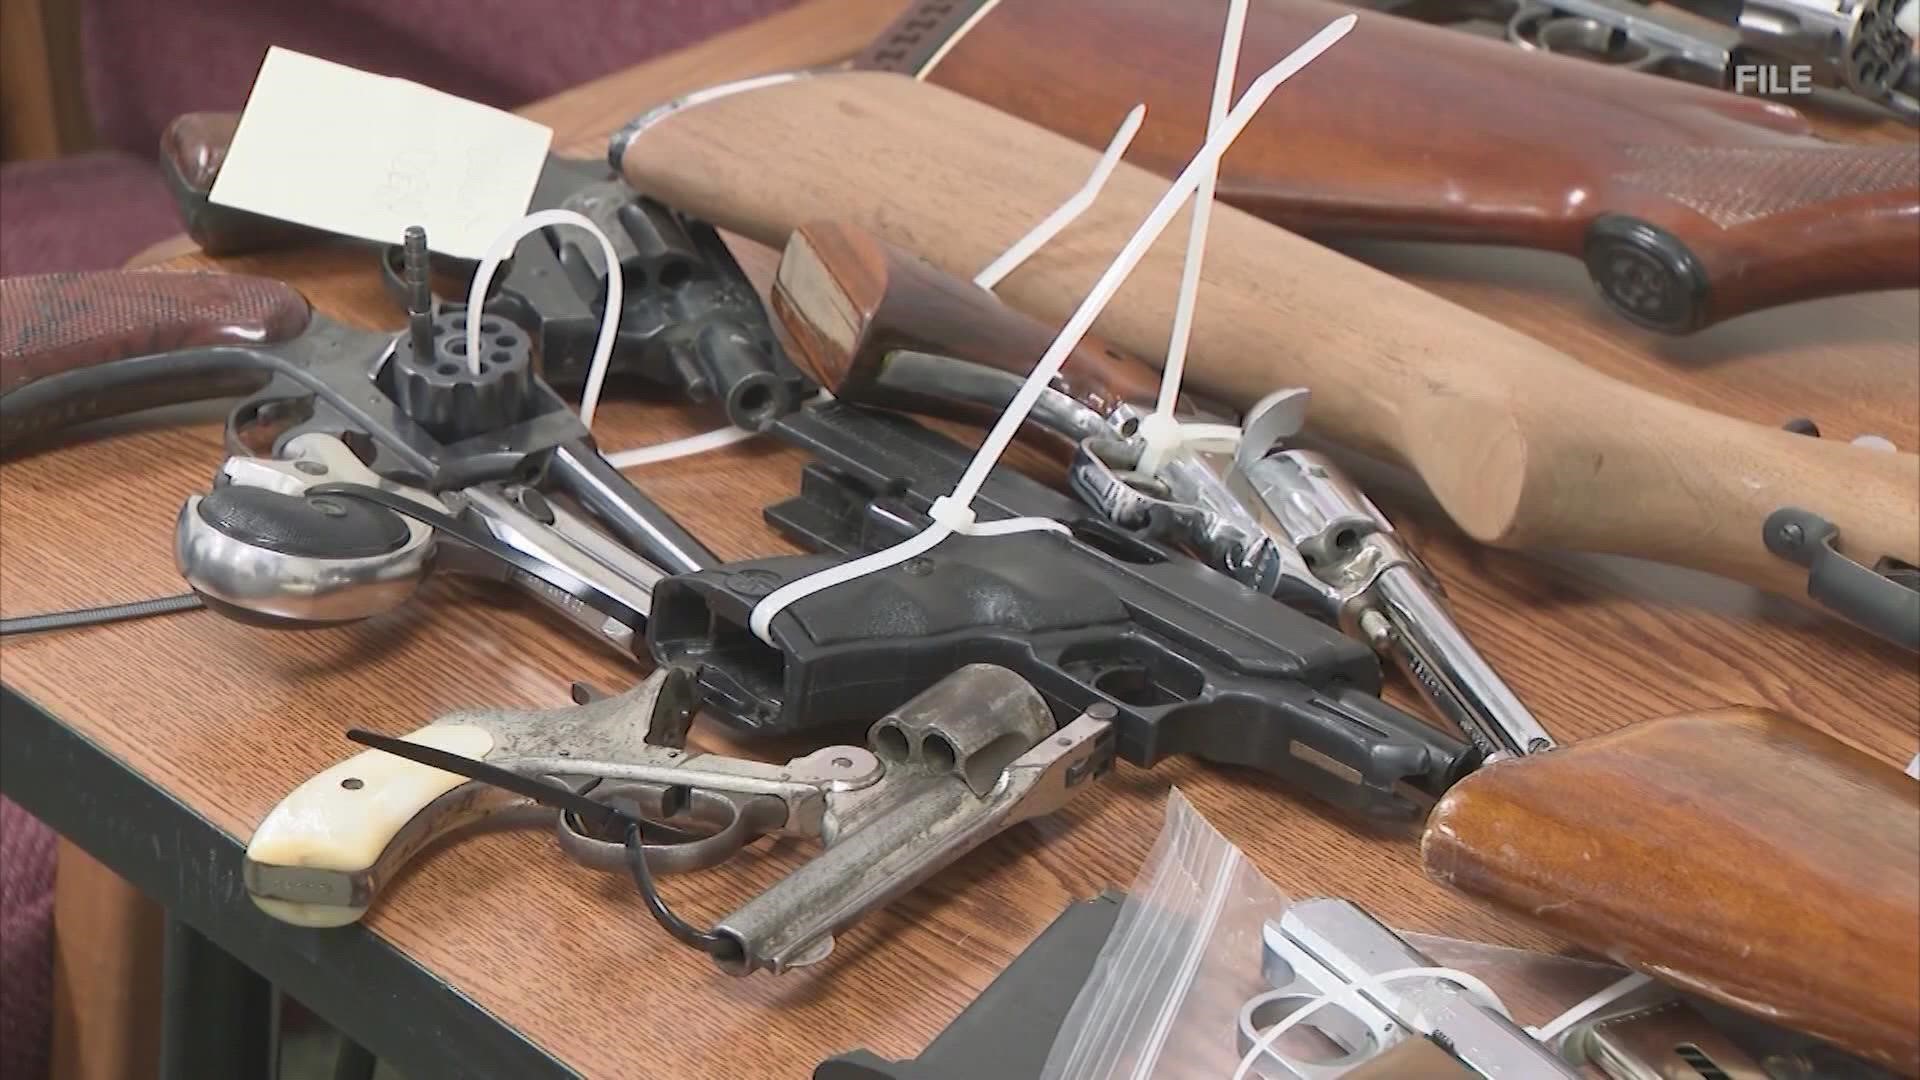 The agency reports nearly 4,000 guns have been stolen from vehicles in Houston over the last year.